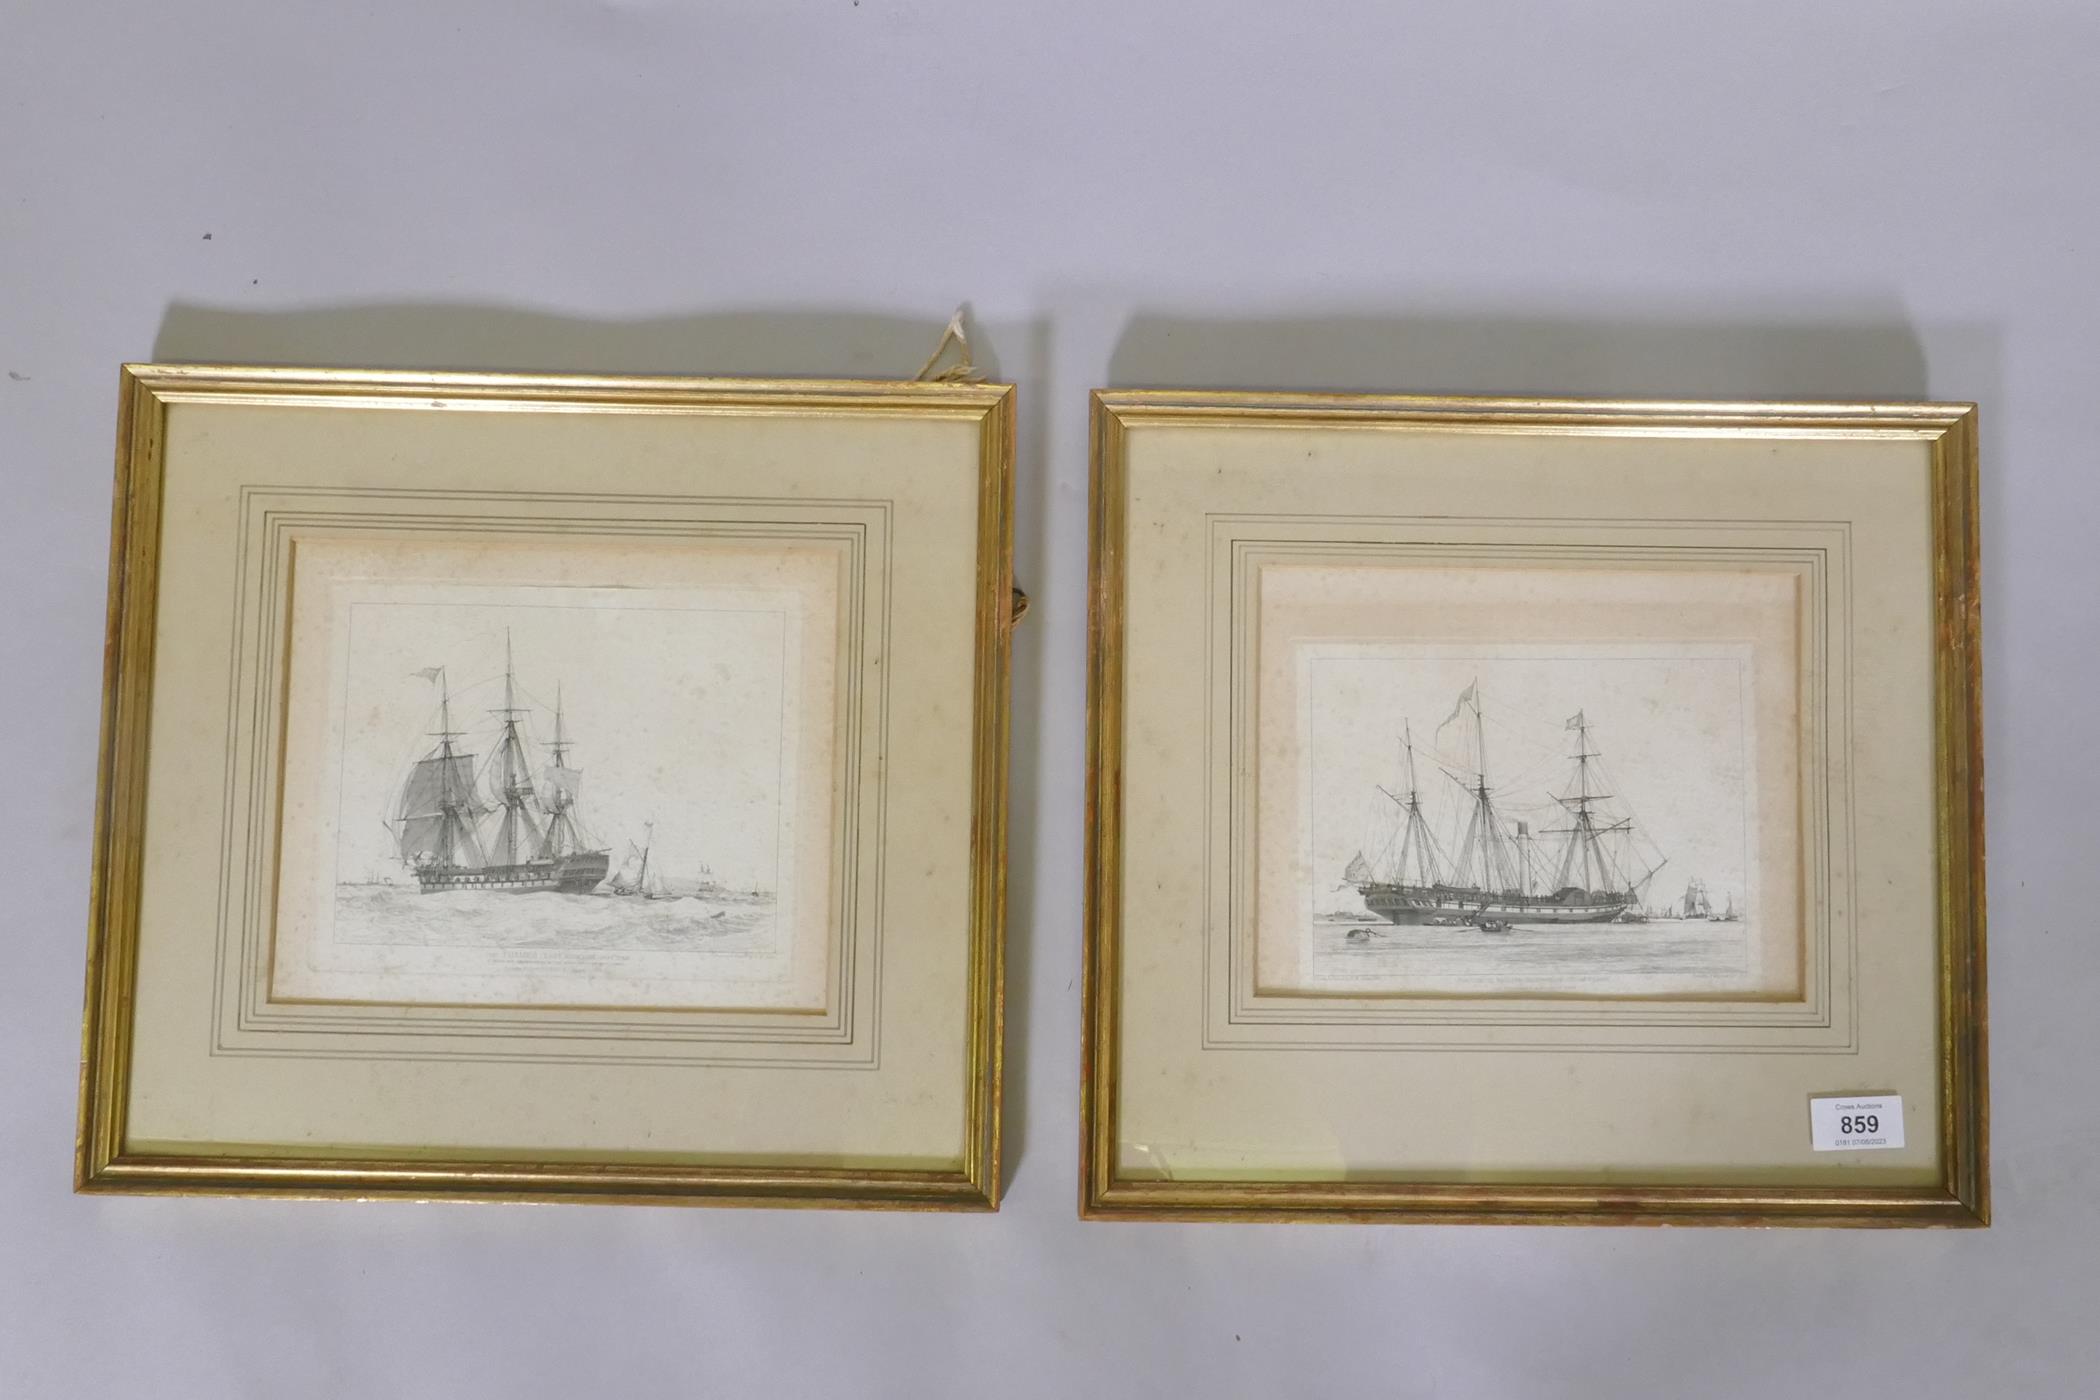 E.W. Cooke, a pair of C19th etchings, The Thames, East Indianman 1424 tons, drawn and etched by